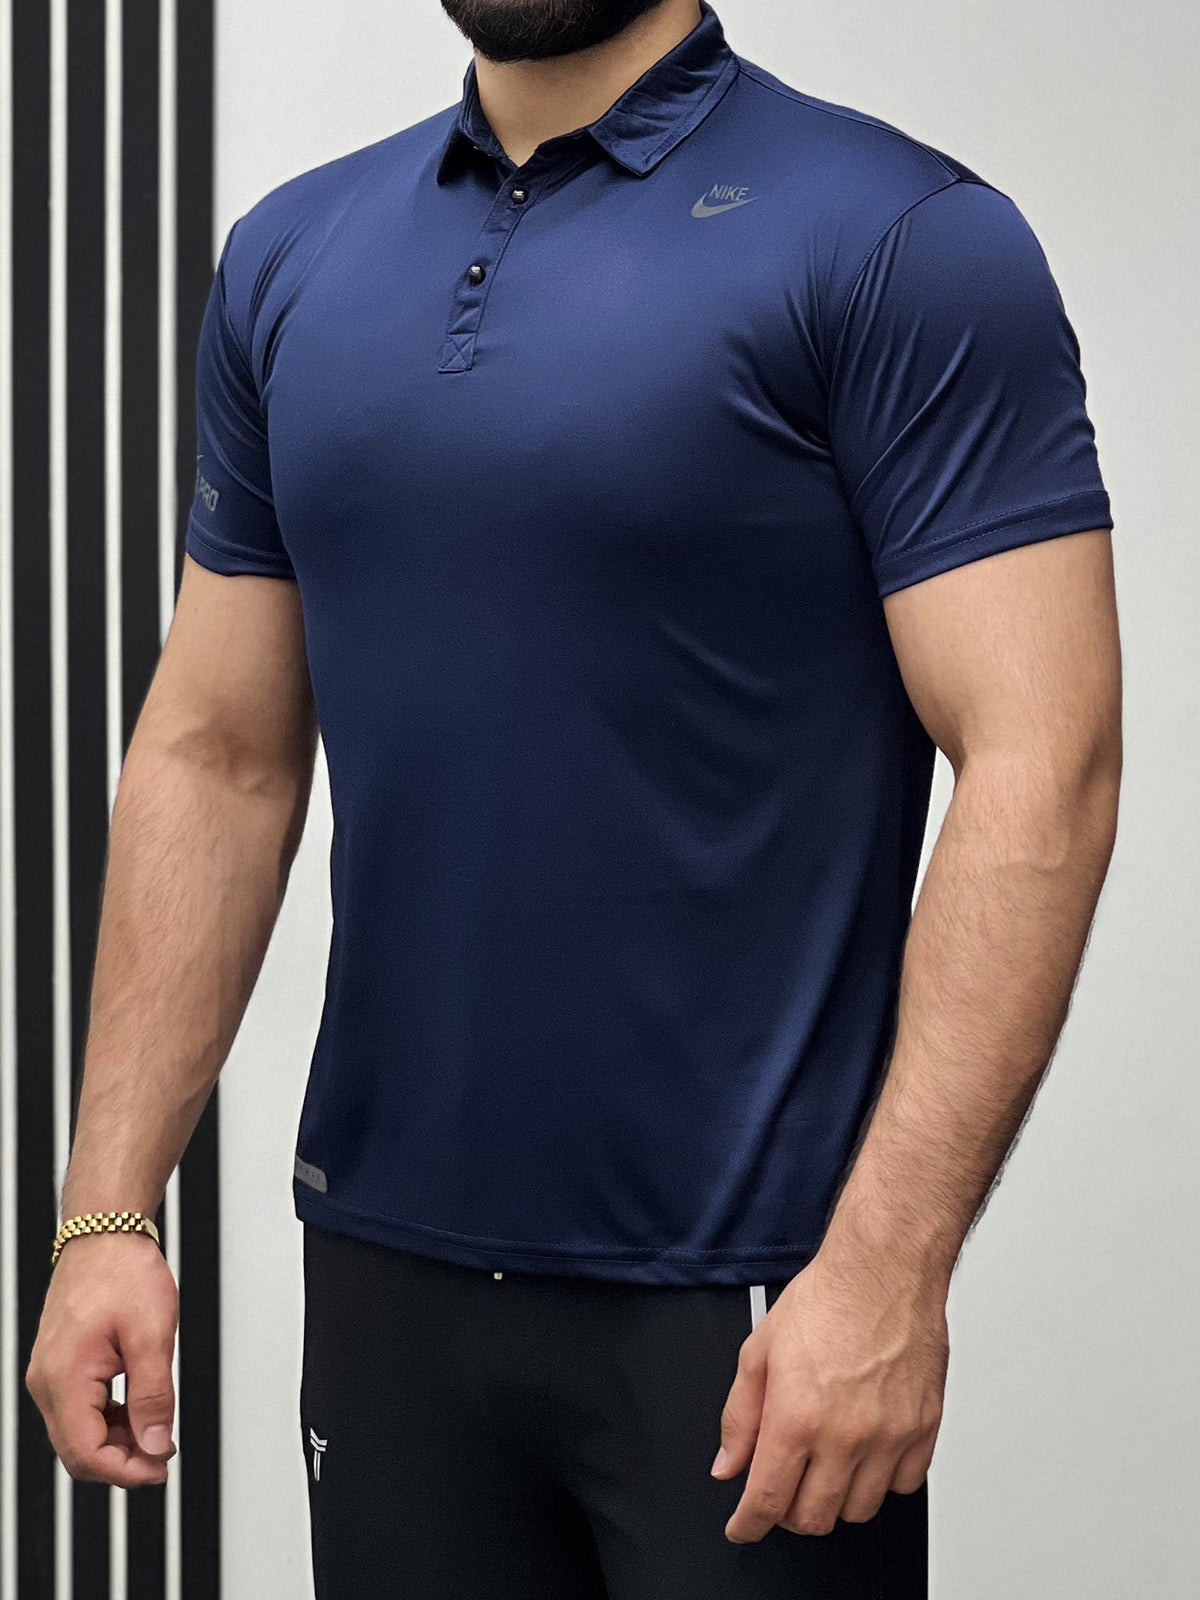 Copy of Dry Fit Polo With Reflector Logo In Navy Blue